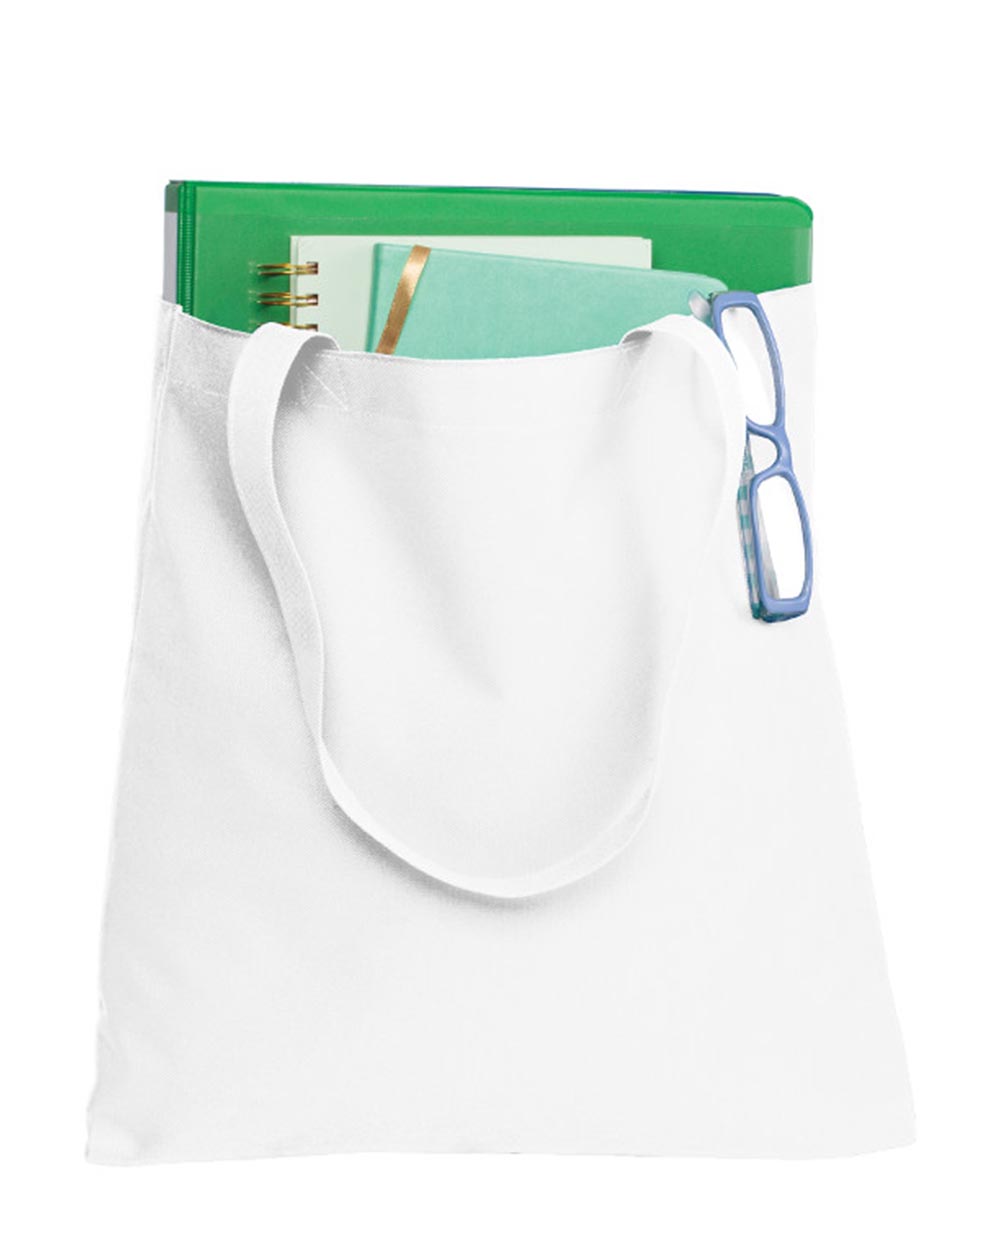 White tote bags for daily use